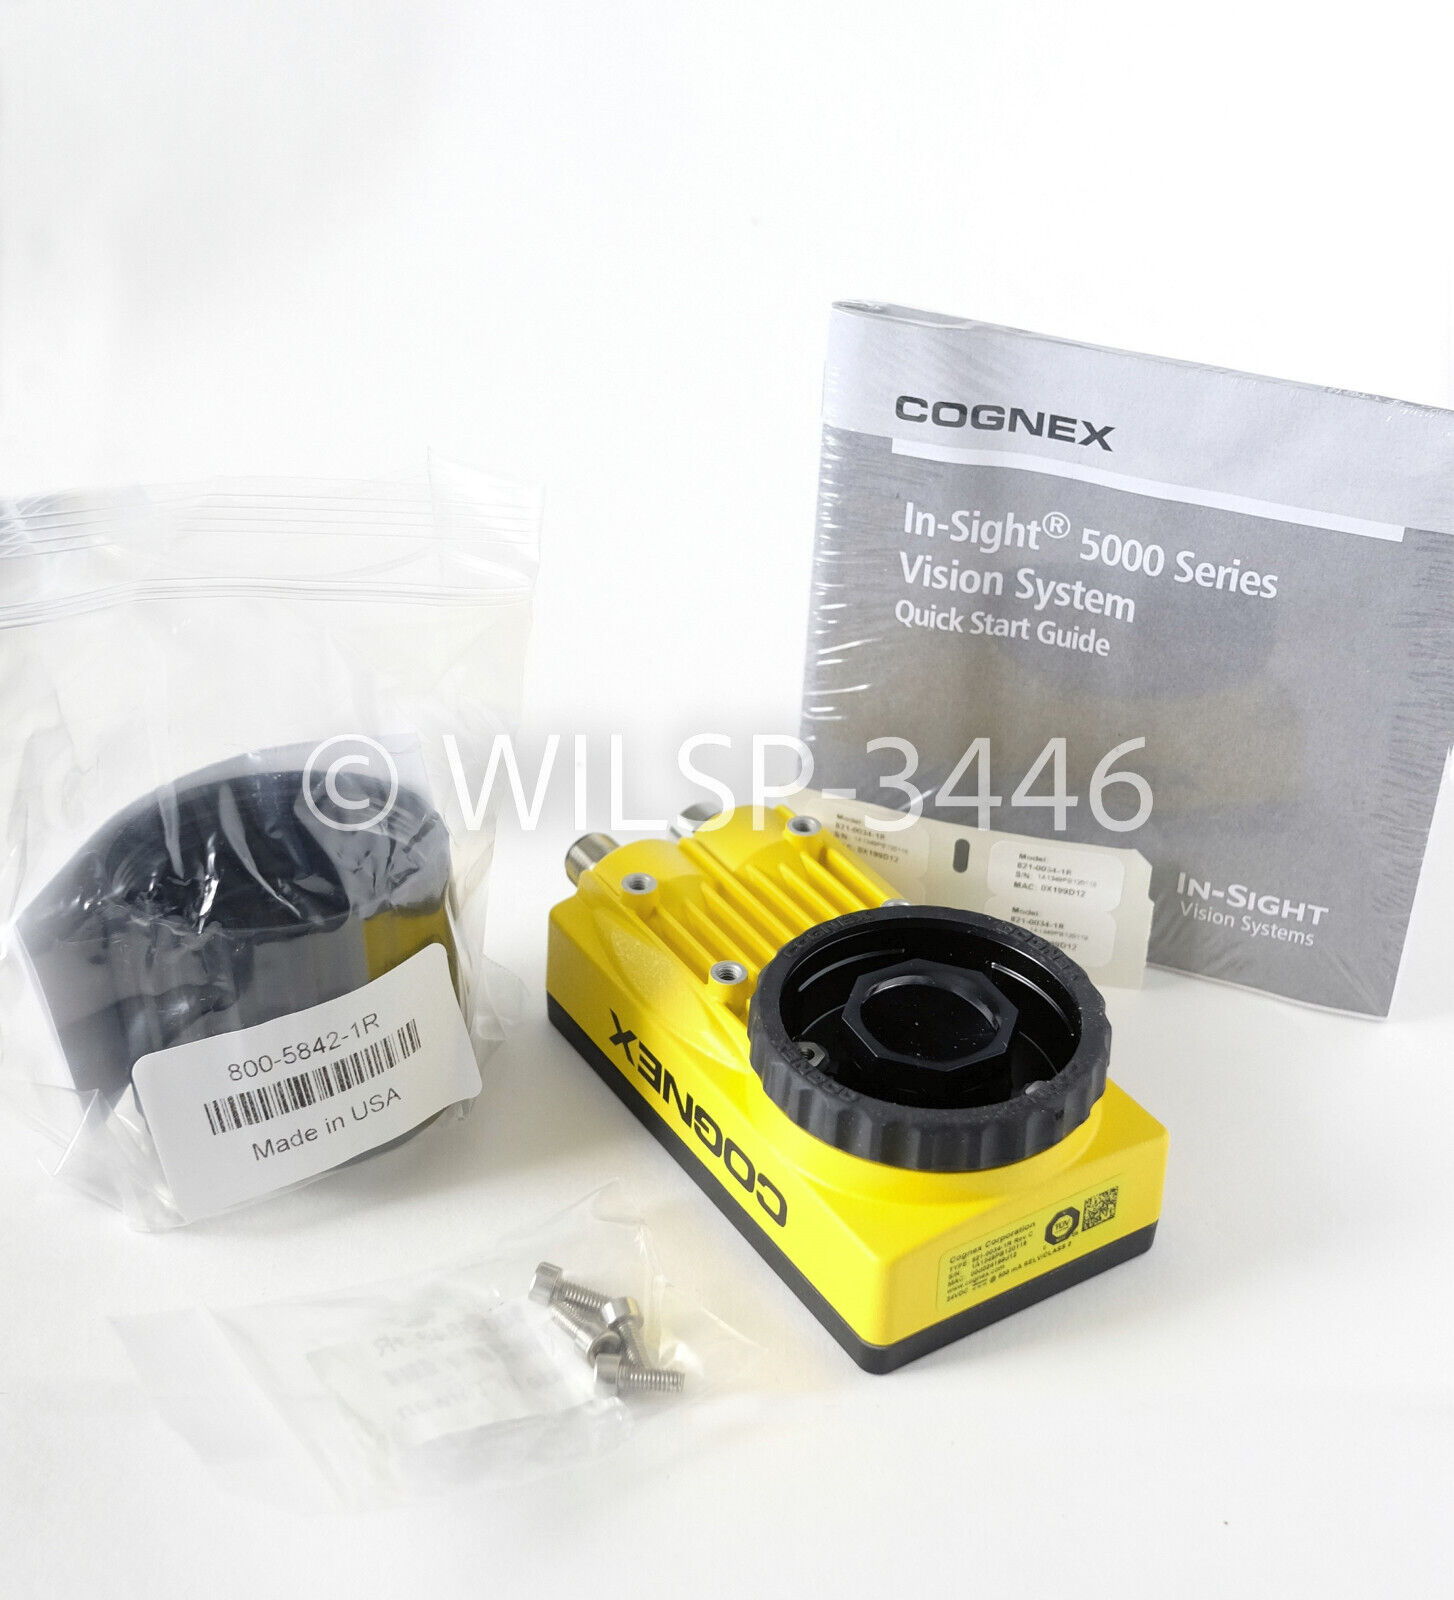 [New, In Box] Cognex In-Sight IS5100-01 Machine Vision Camera 825-0207-1R J